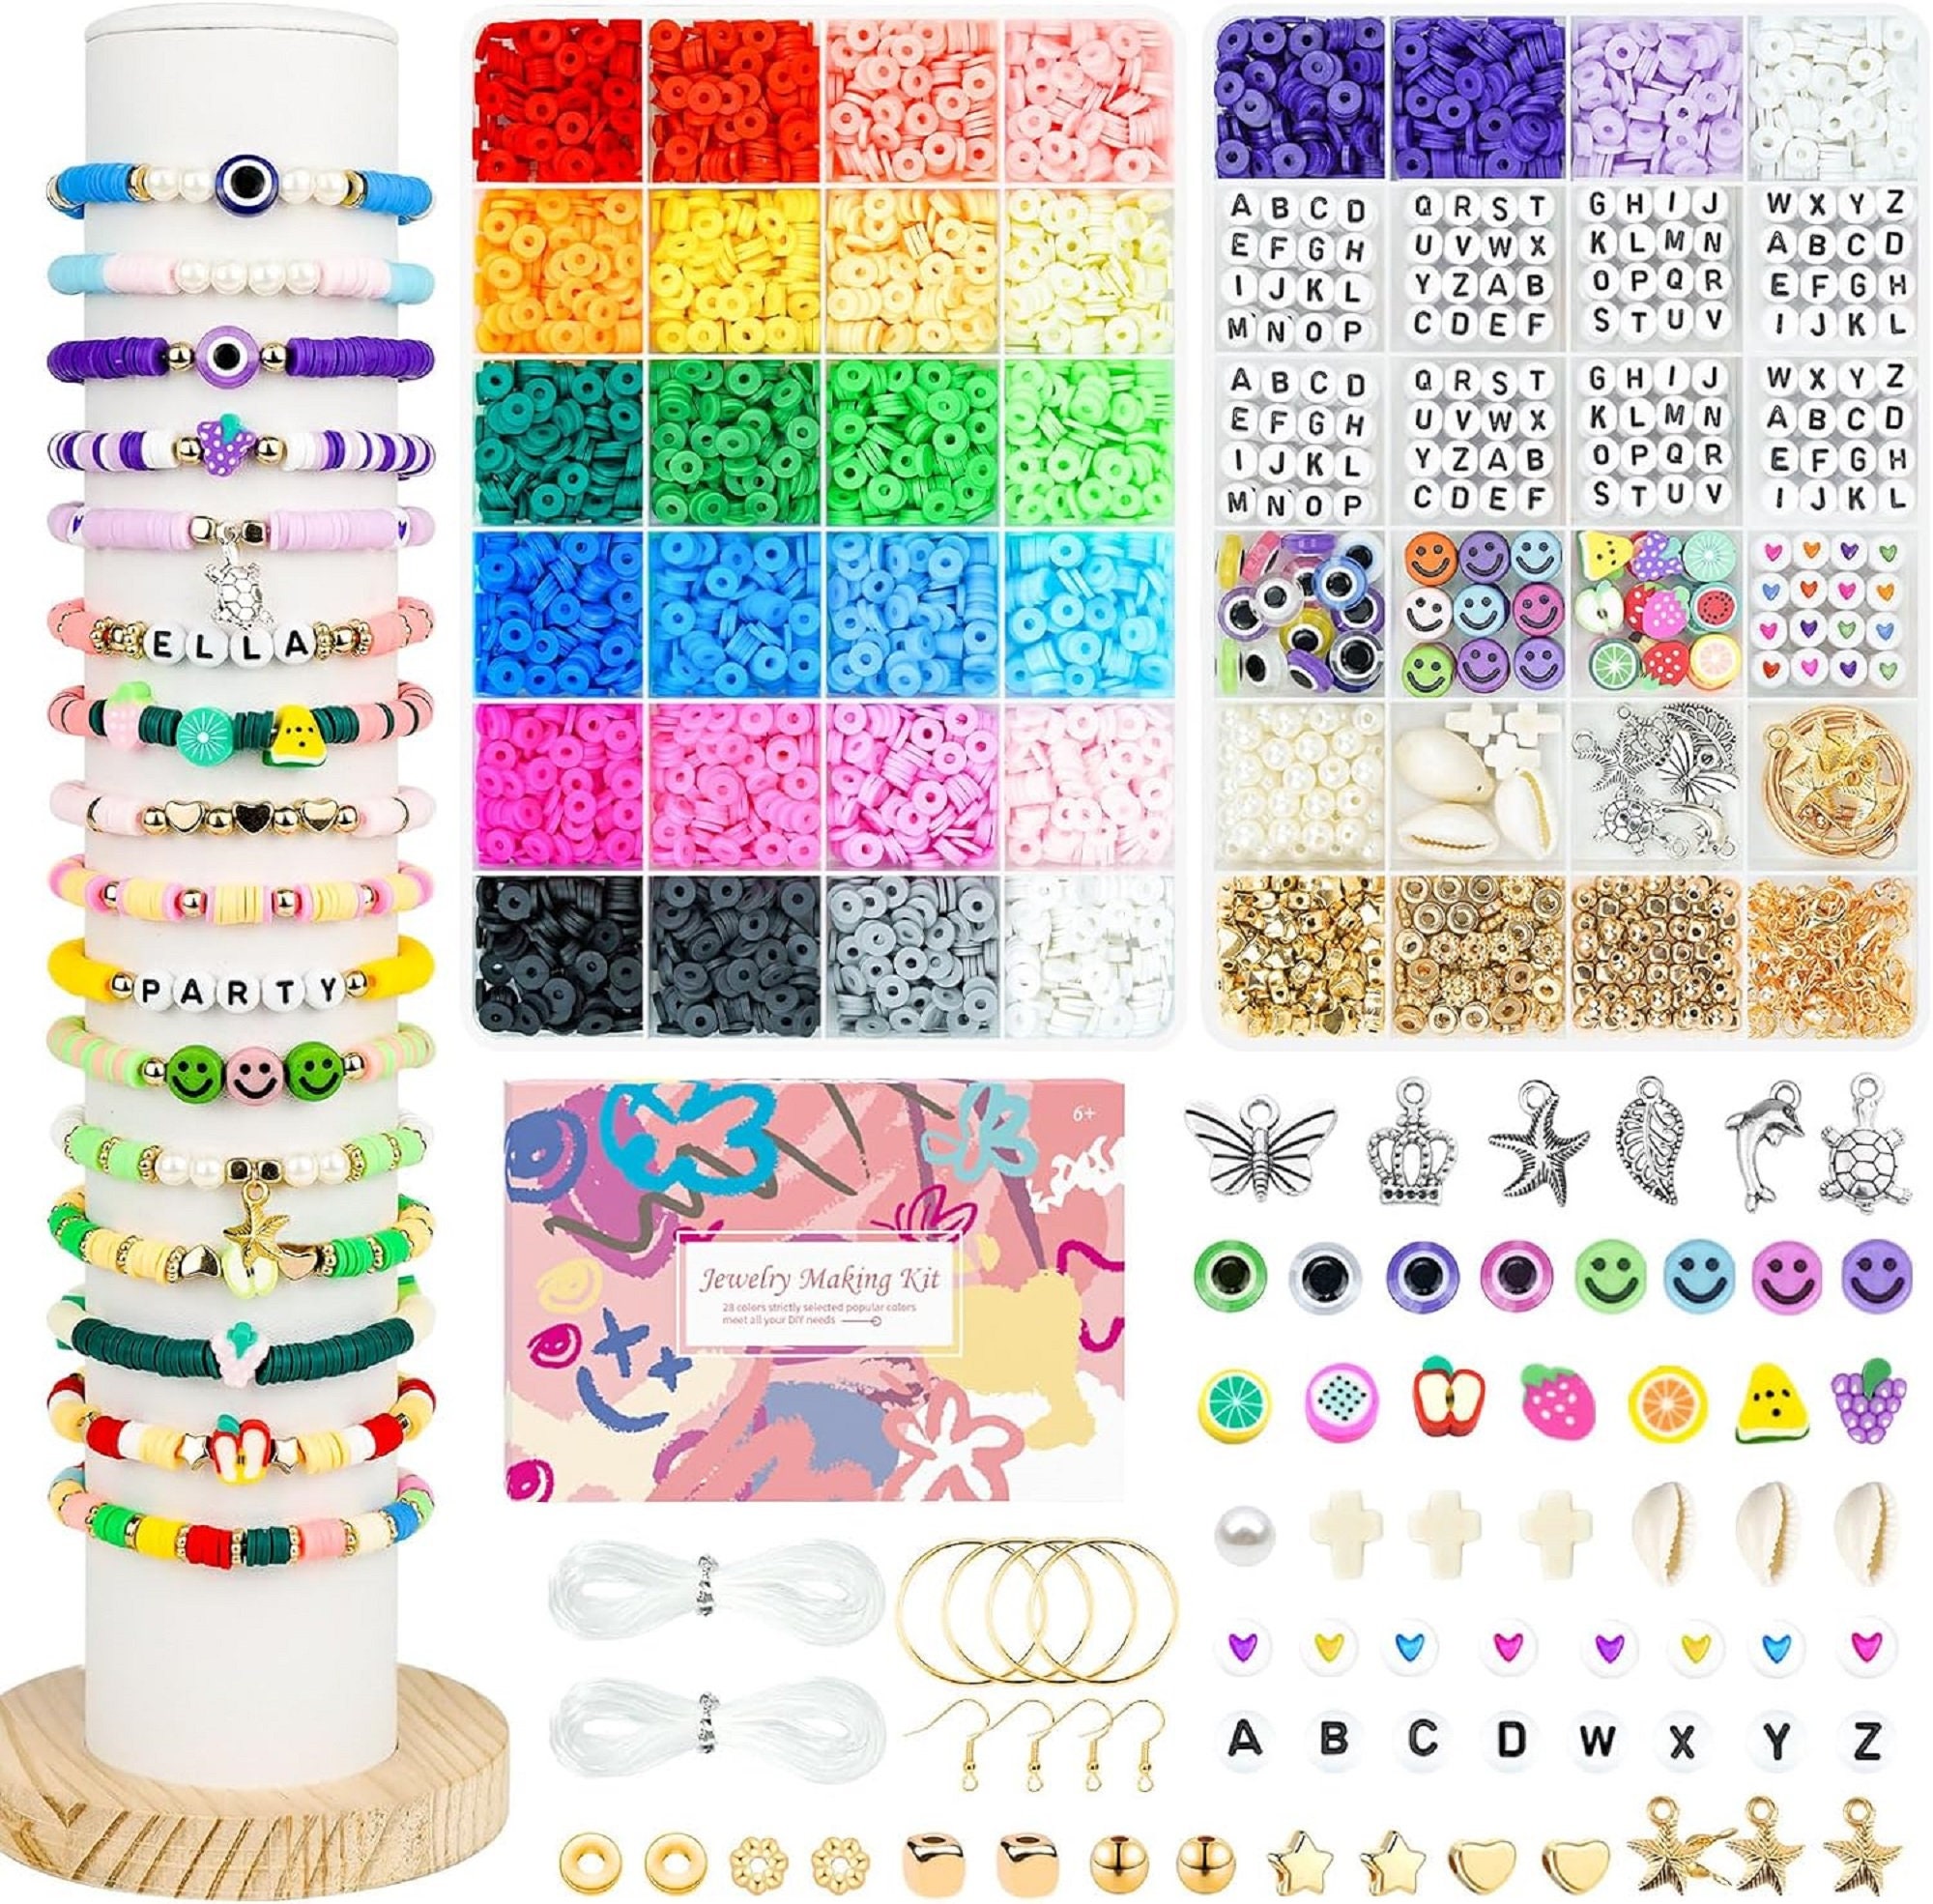  6000 PCS Clay Beads for Bracelet Making, FOLORA Polymer Clay  Beads Pendant Charms Kit for Bracelets Necklace, Jewelry Making Kit Crafts  for Girls Adults : Arts, Crafts & Sewing